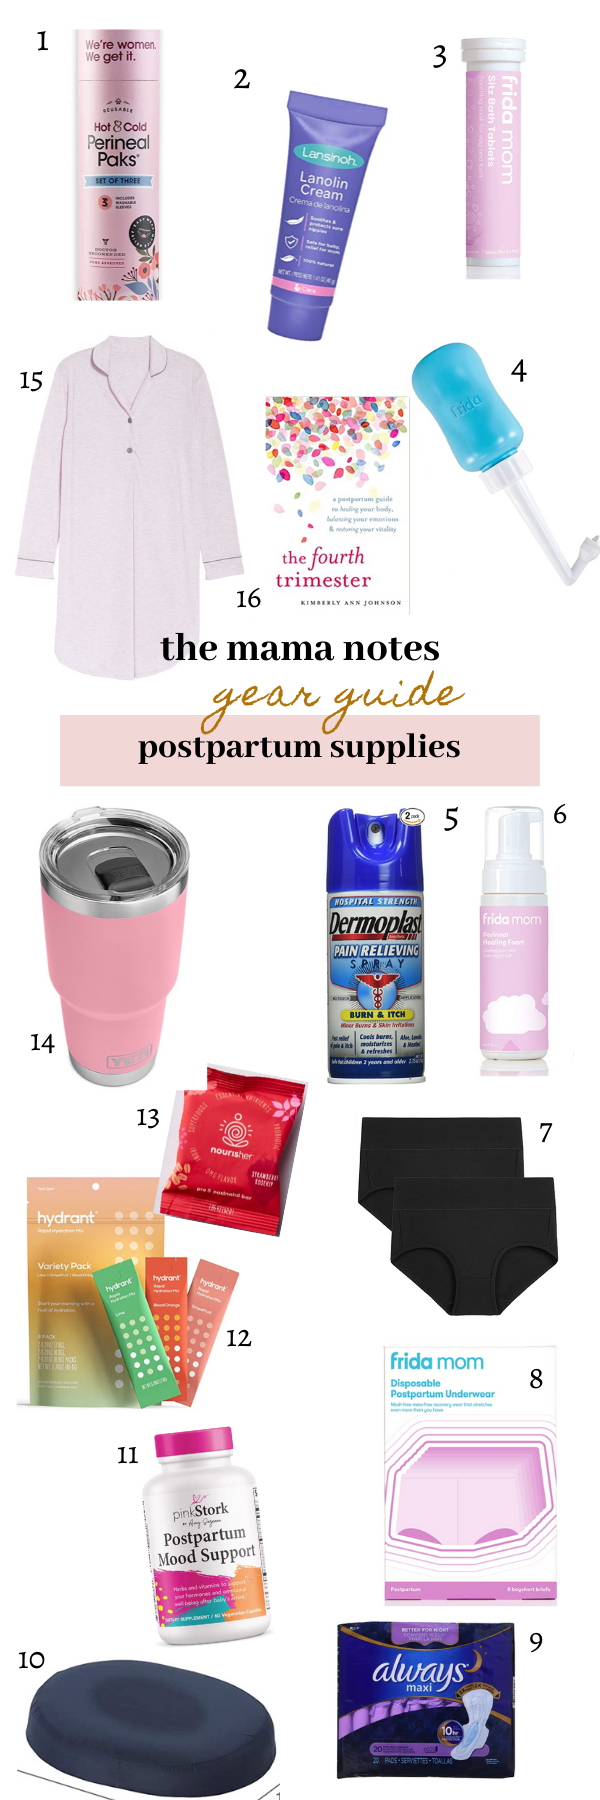 https://themamanotes.com/wp-content/uploads/2020/03/everything-you-need-to-survive-postpartum.png